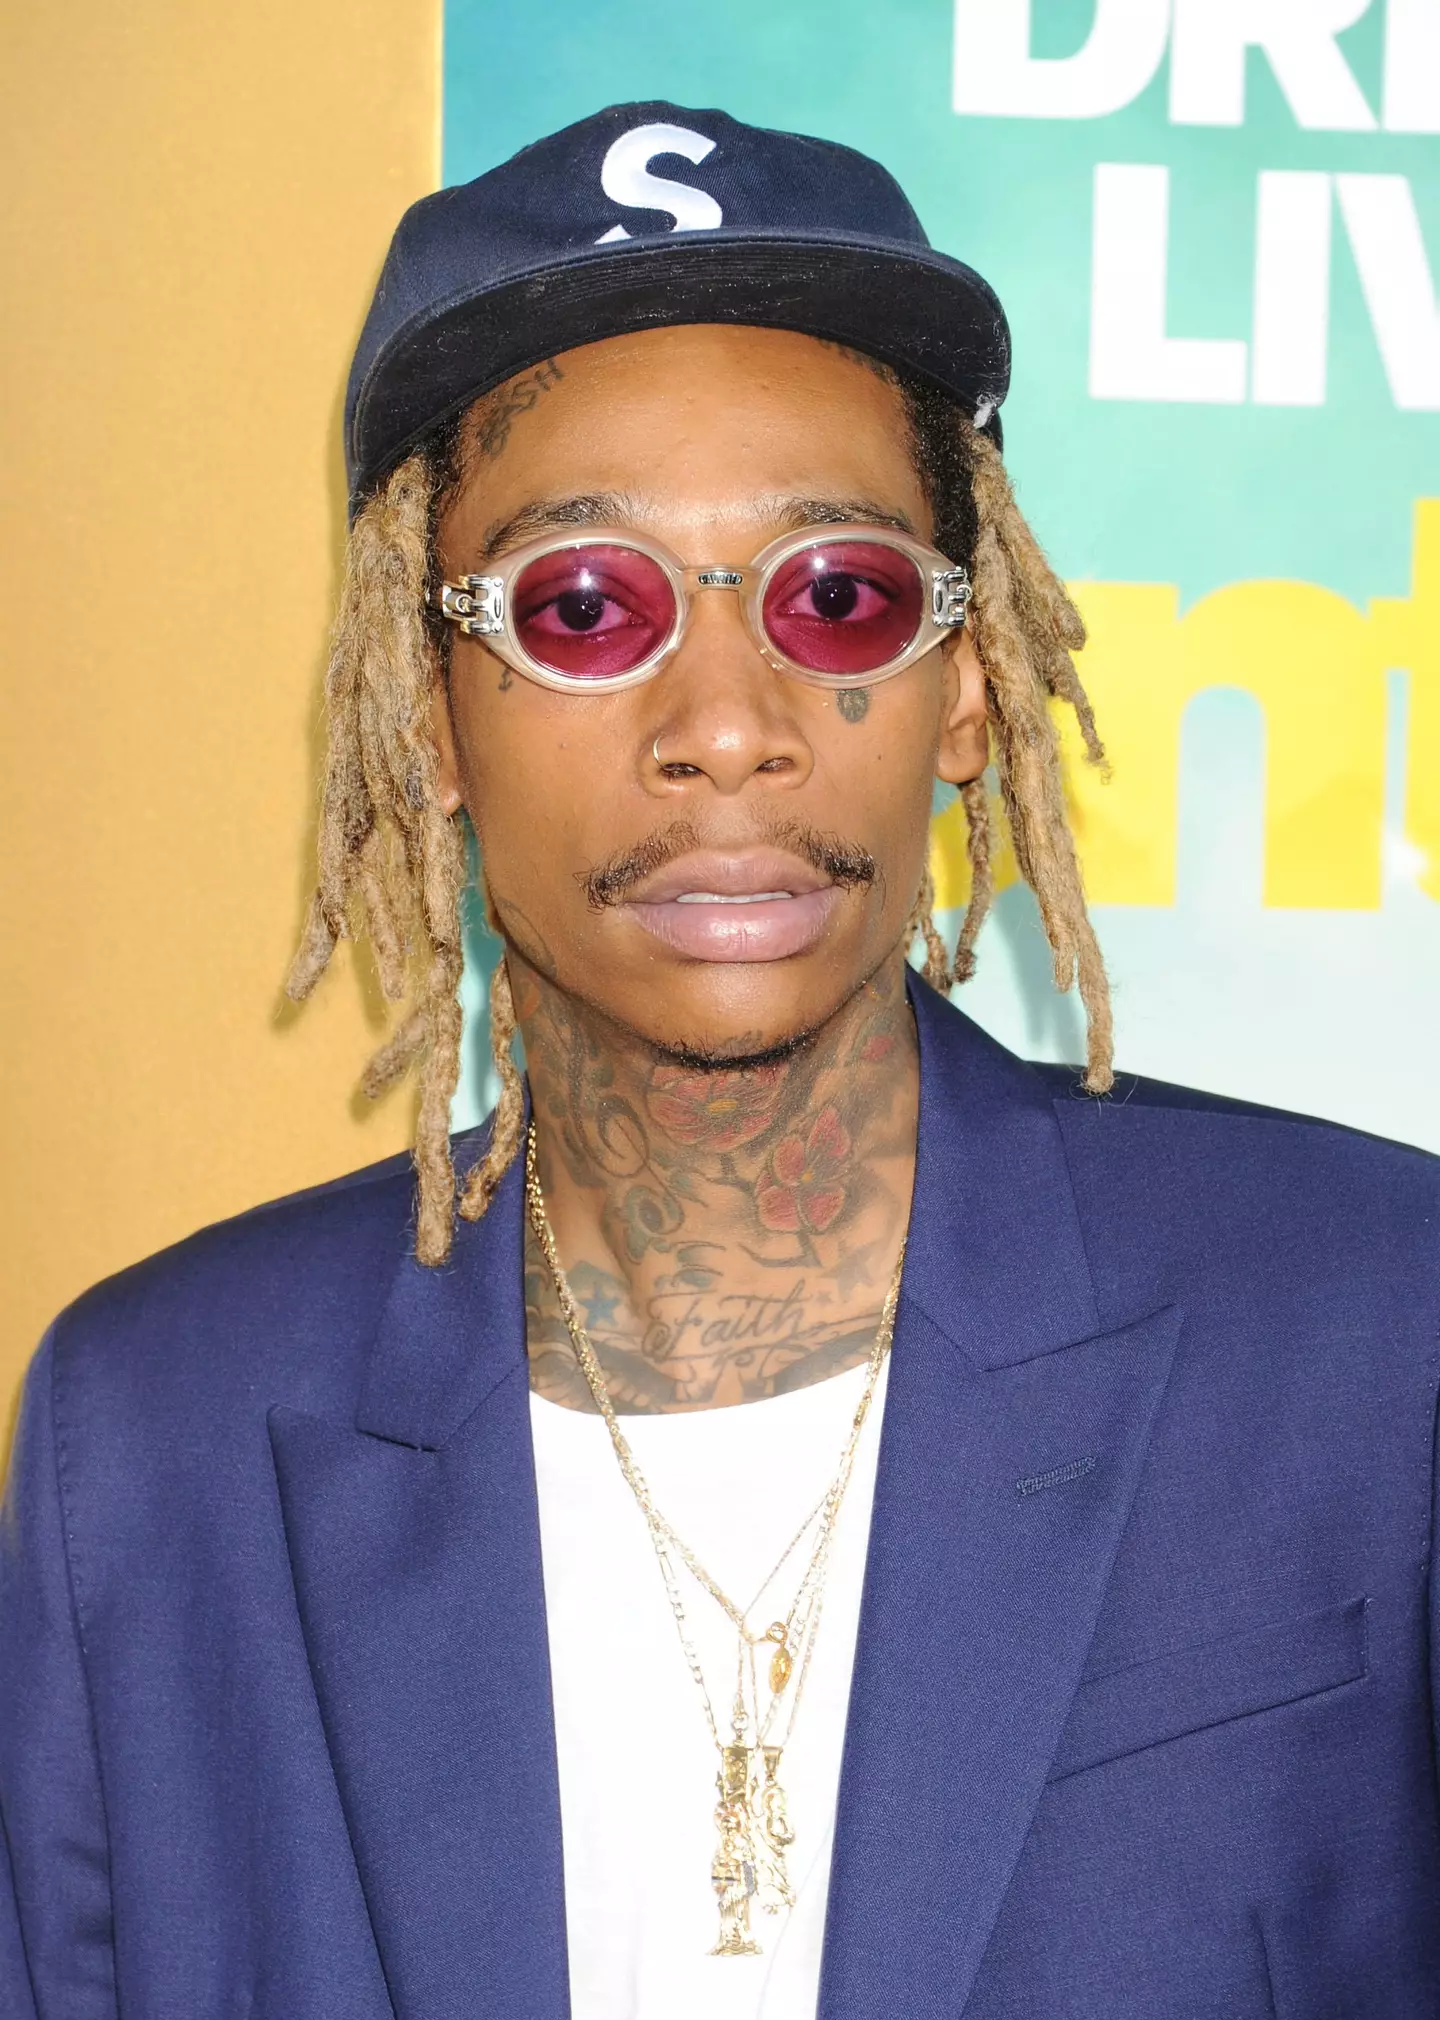 Apparently, Wiz Khalifa can put away some serious reefer.